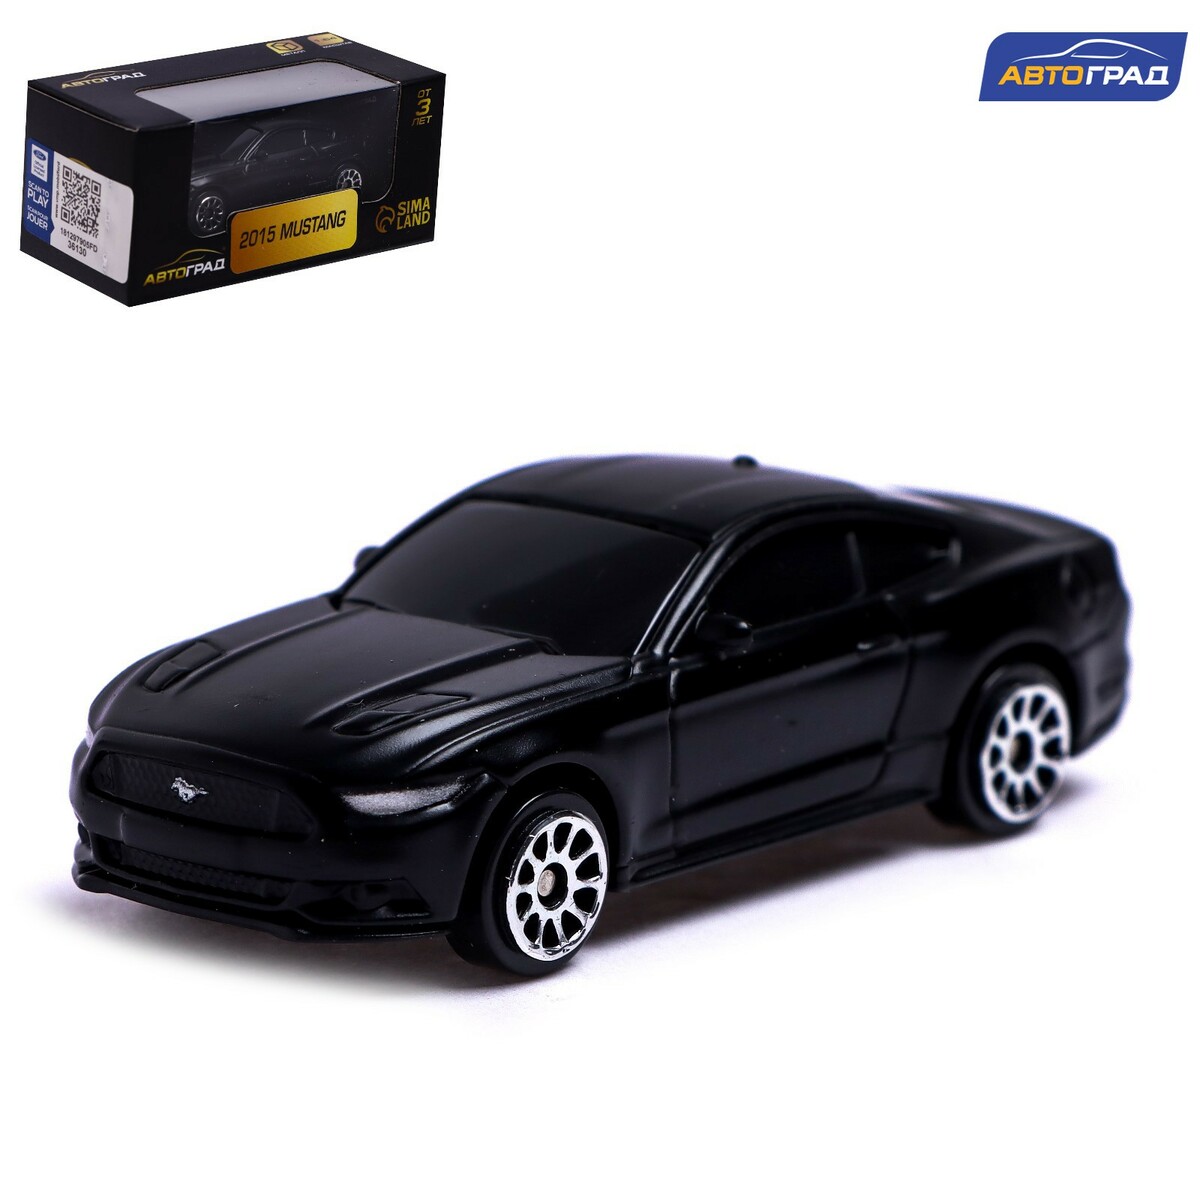 Машина металлическая ford mustang, 1:64, цвет черный матовый datong wolrd car remote control key fit for ford mondeo 2 0t kuga mustang edge ds7t 15k601 d id49 chip 434mhz replace keyless go